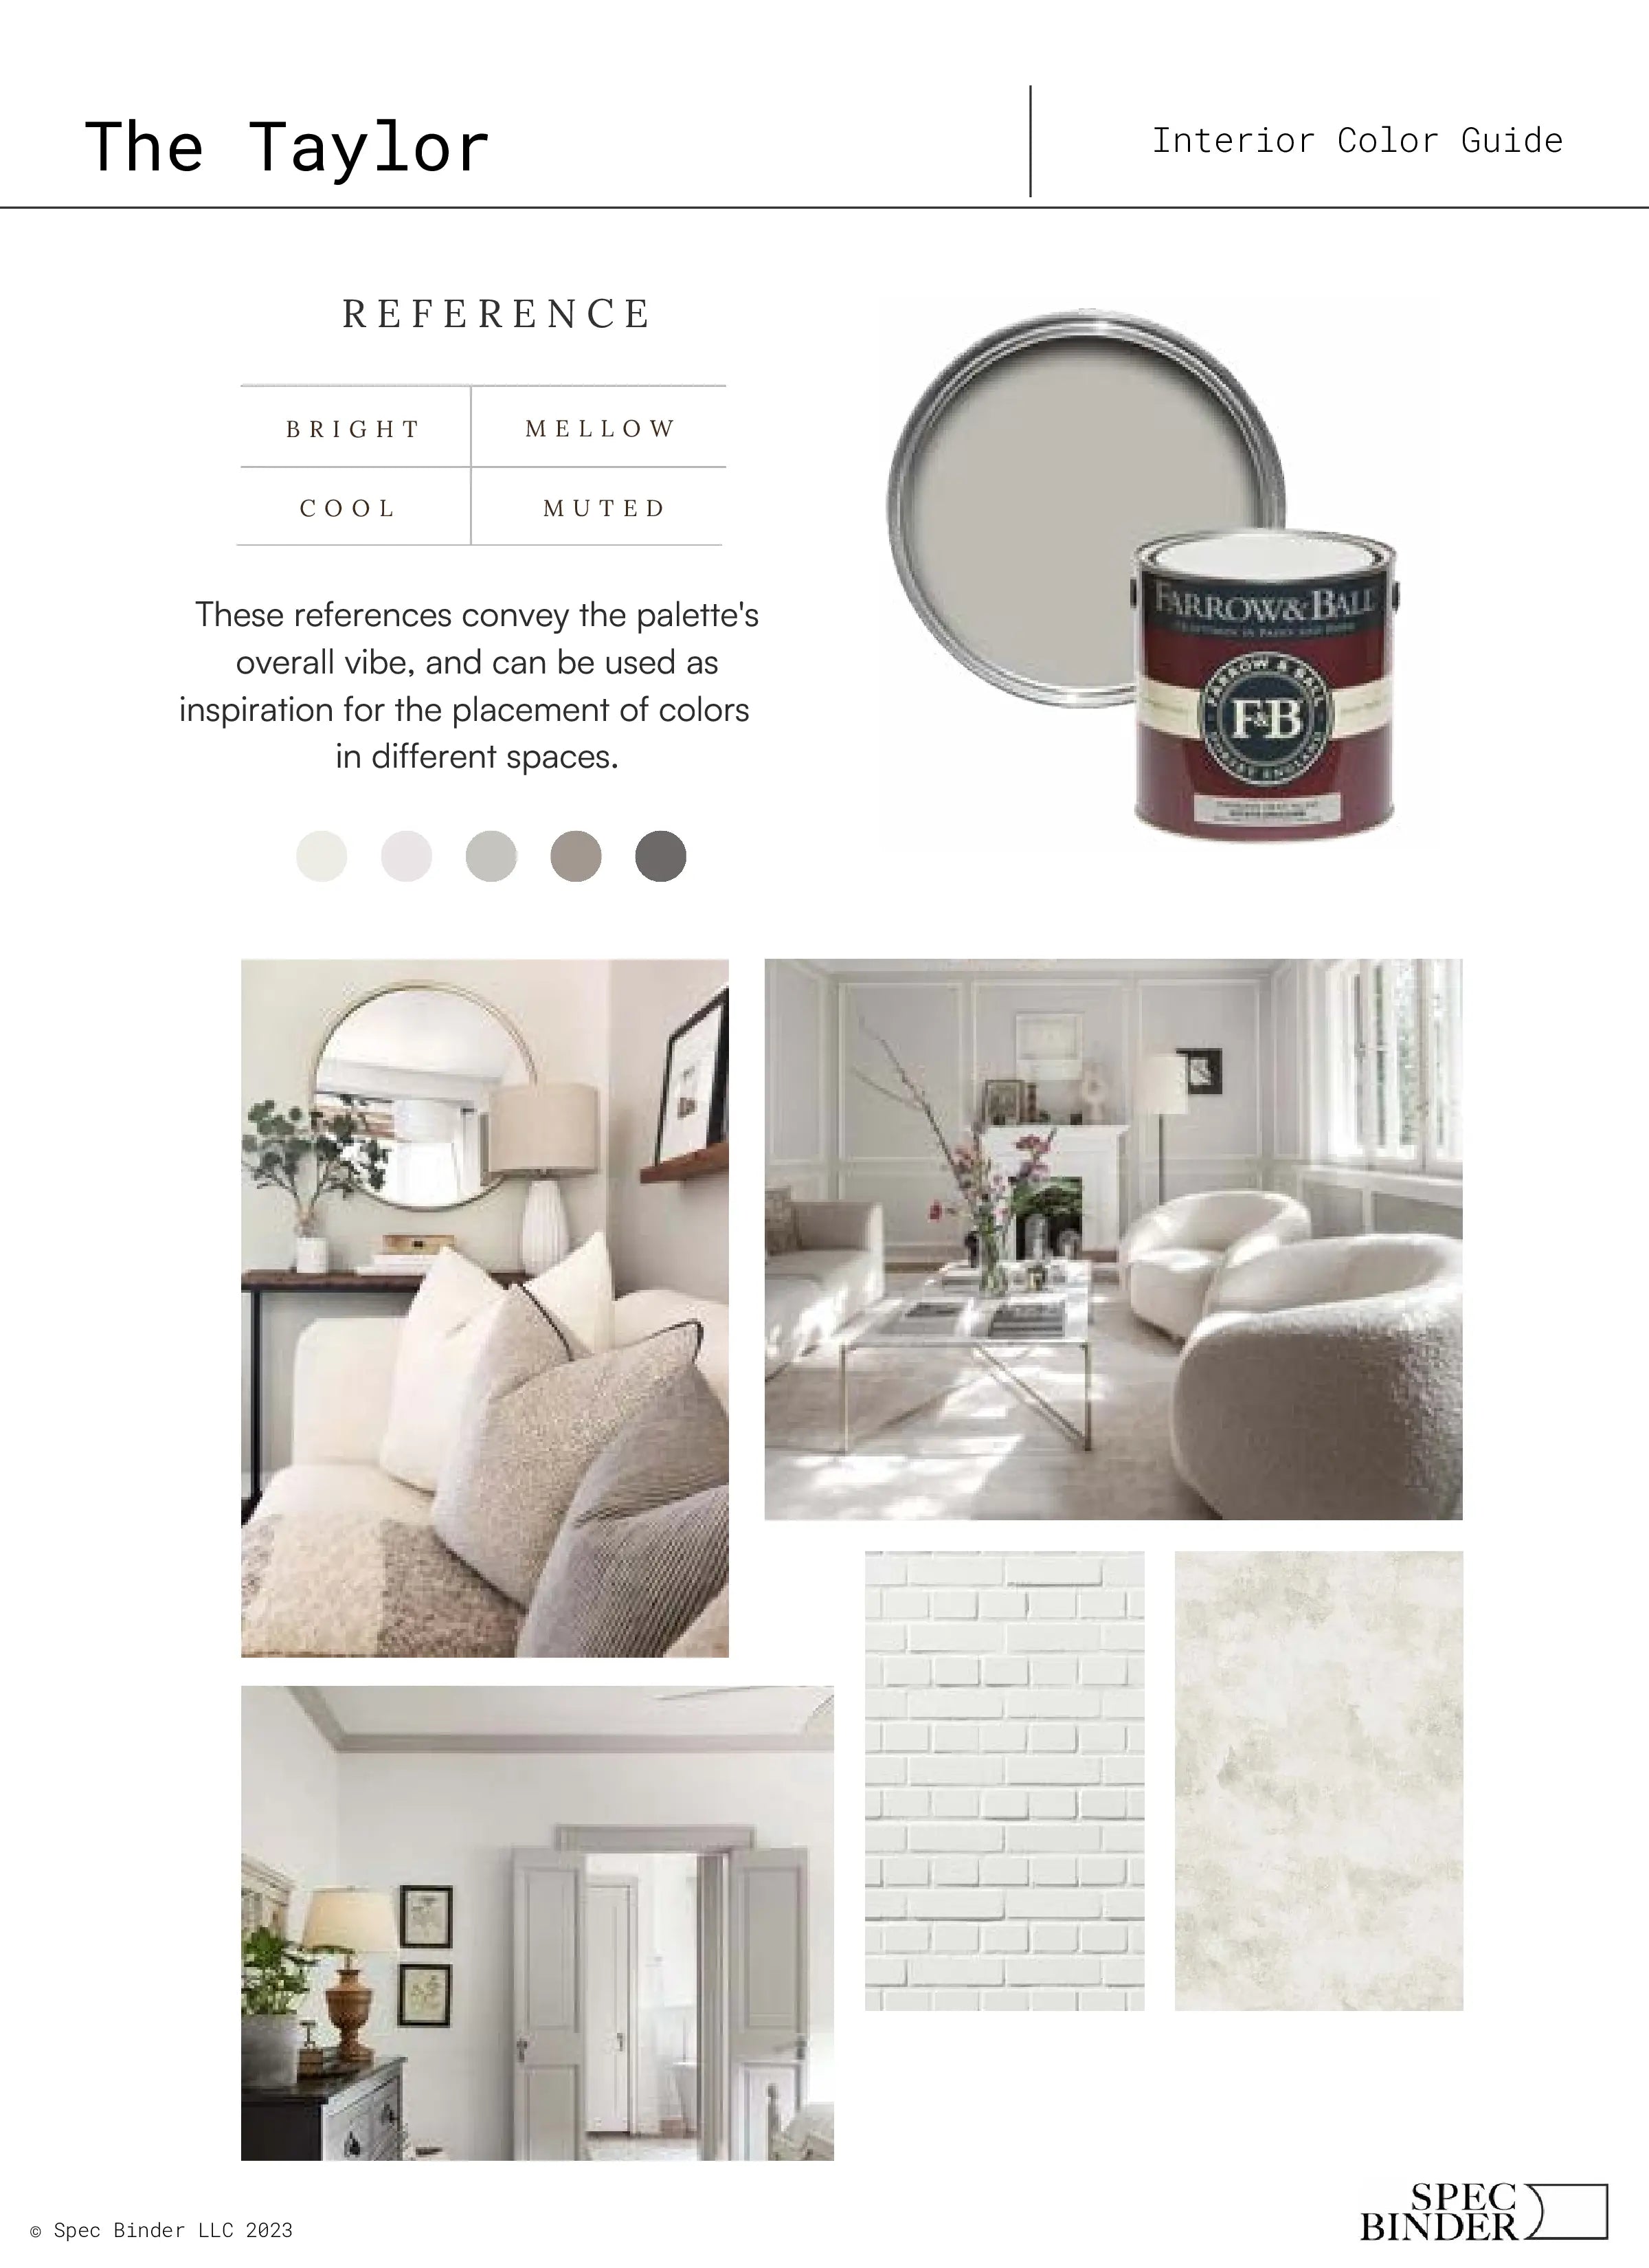 See photos of The Taylor paint colors in different spaces.The Taylor Color Palette reference images, paint samples, color swatches, and design elements. The Taylor color guide is Bright, Mellow, Cool, and Muted. The Taylor 